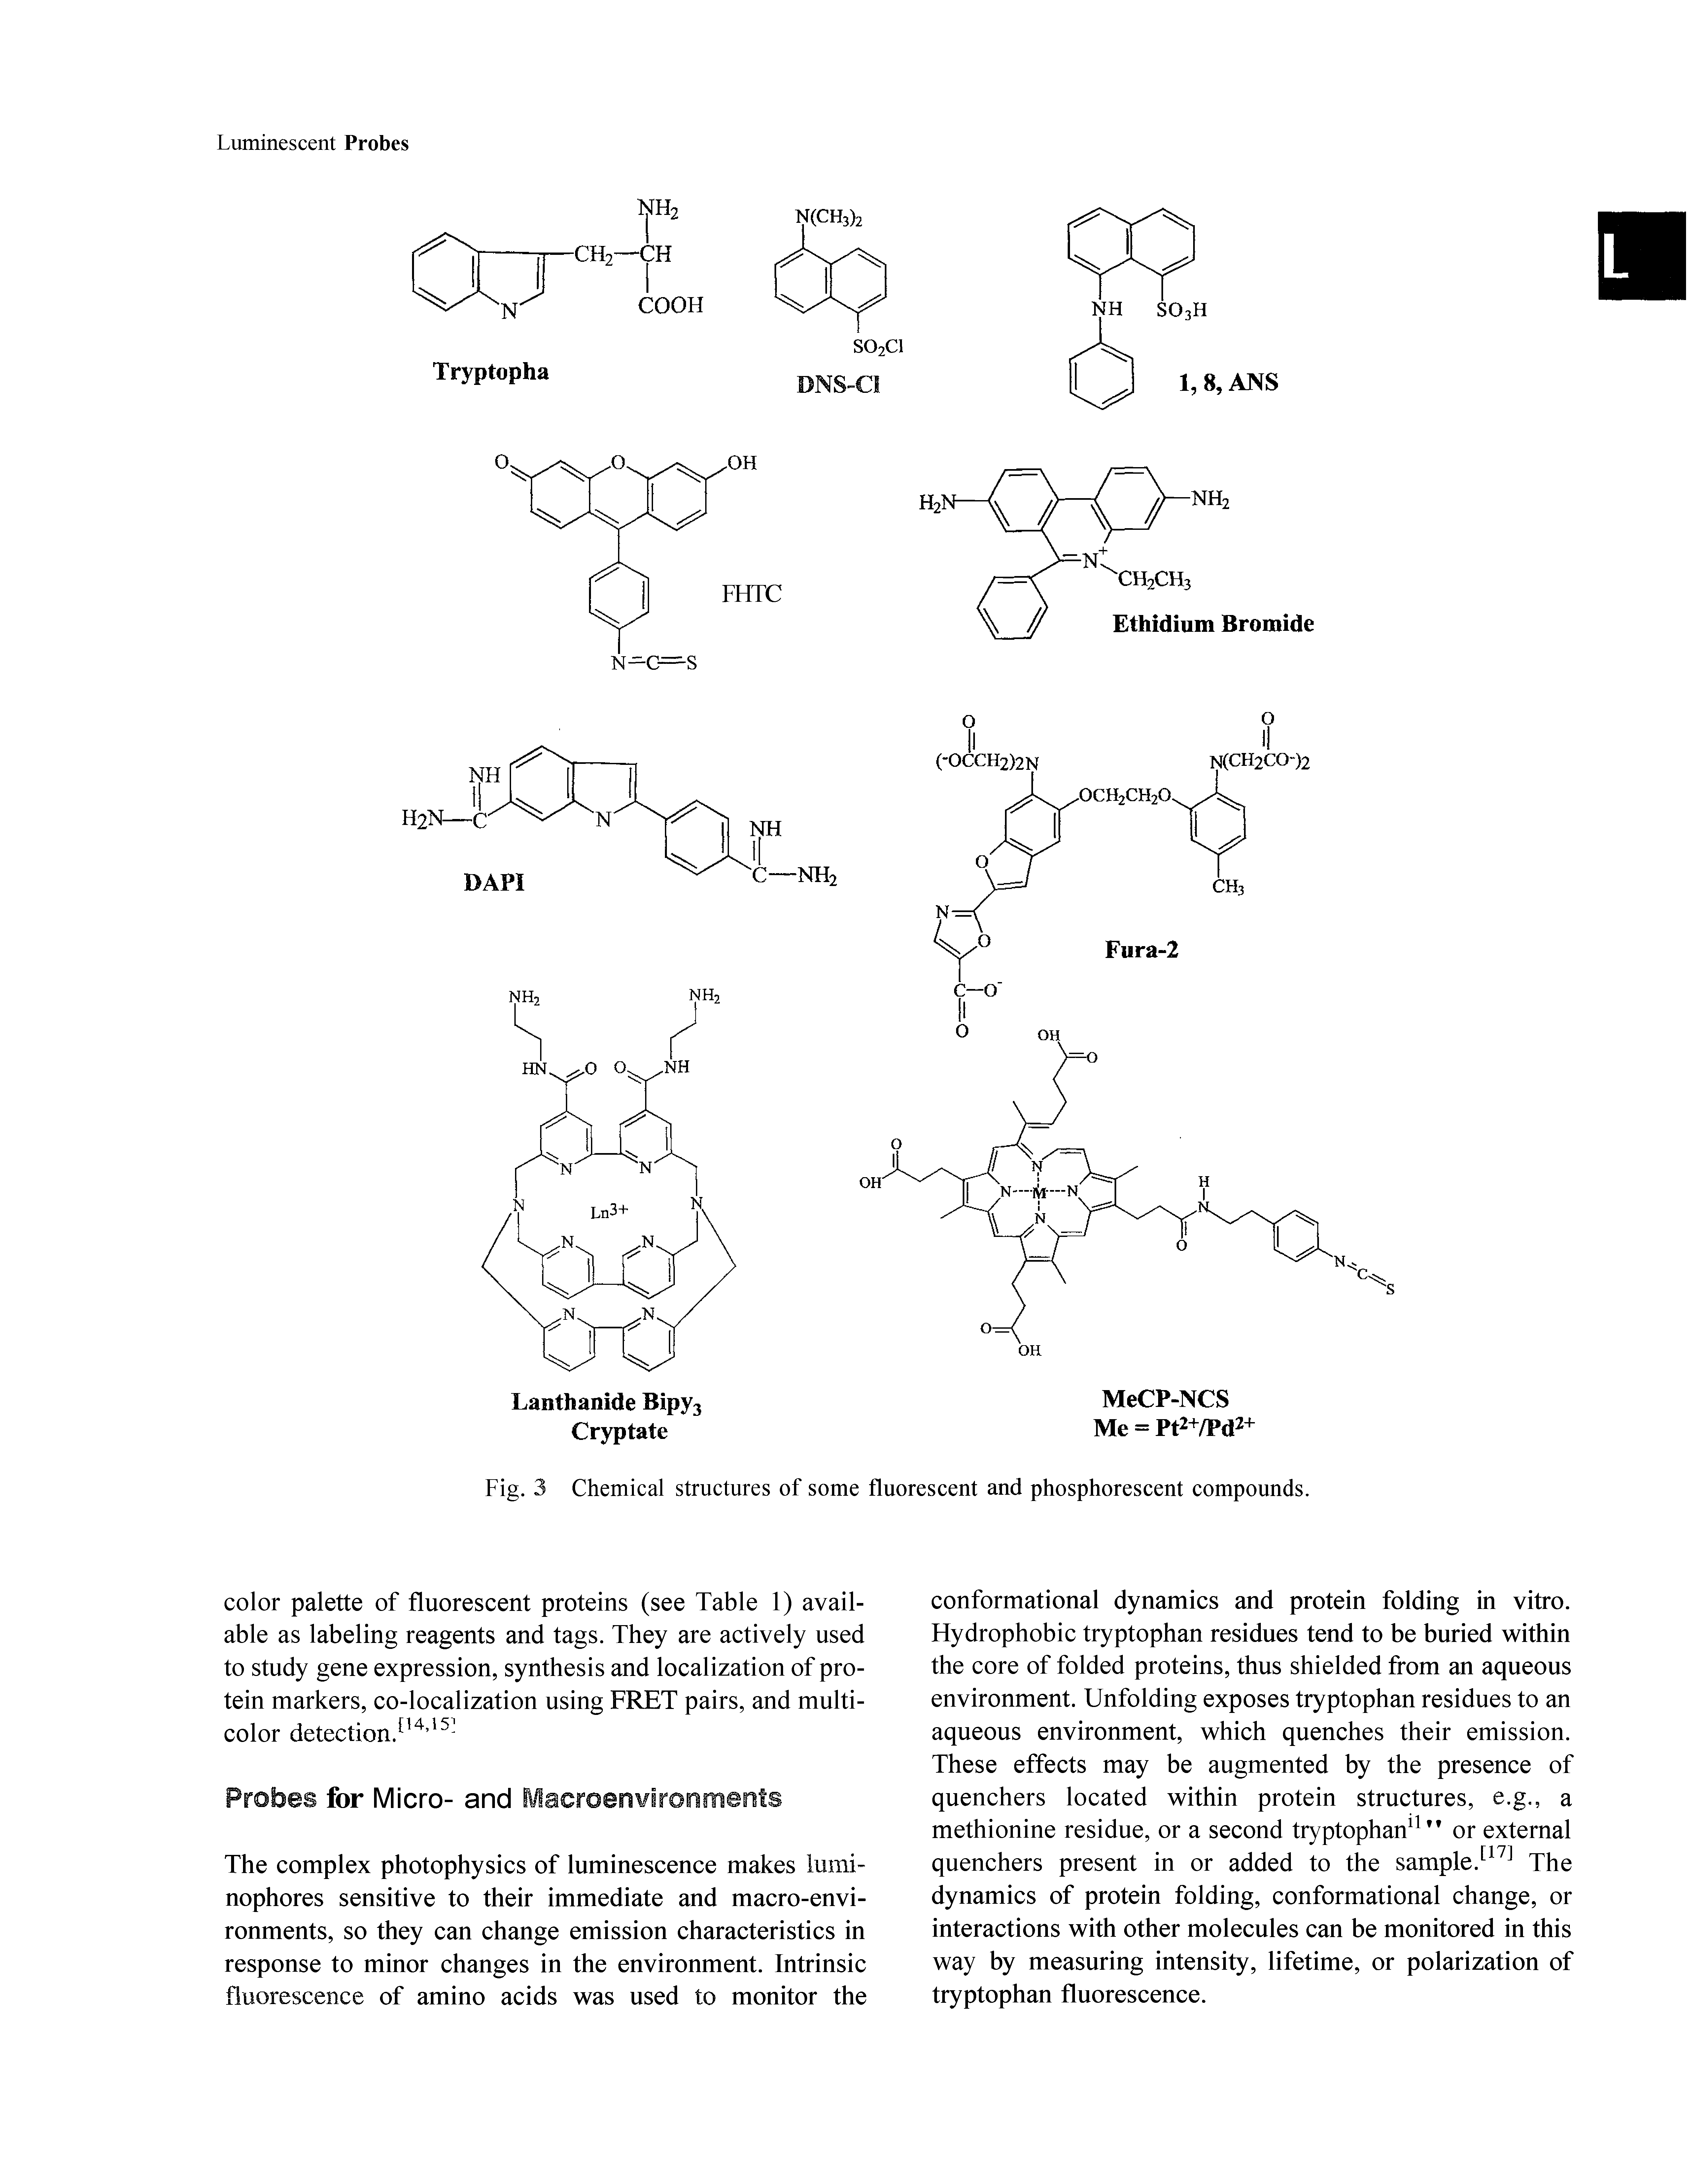 Fig. 3 Chemical structures of some fluorescent and phosphorescent compounds.